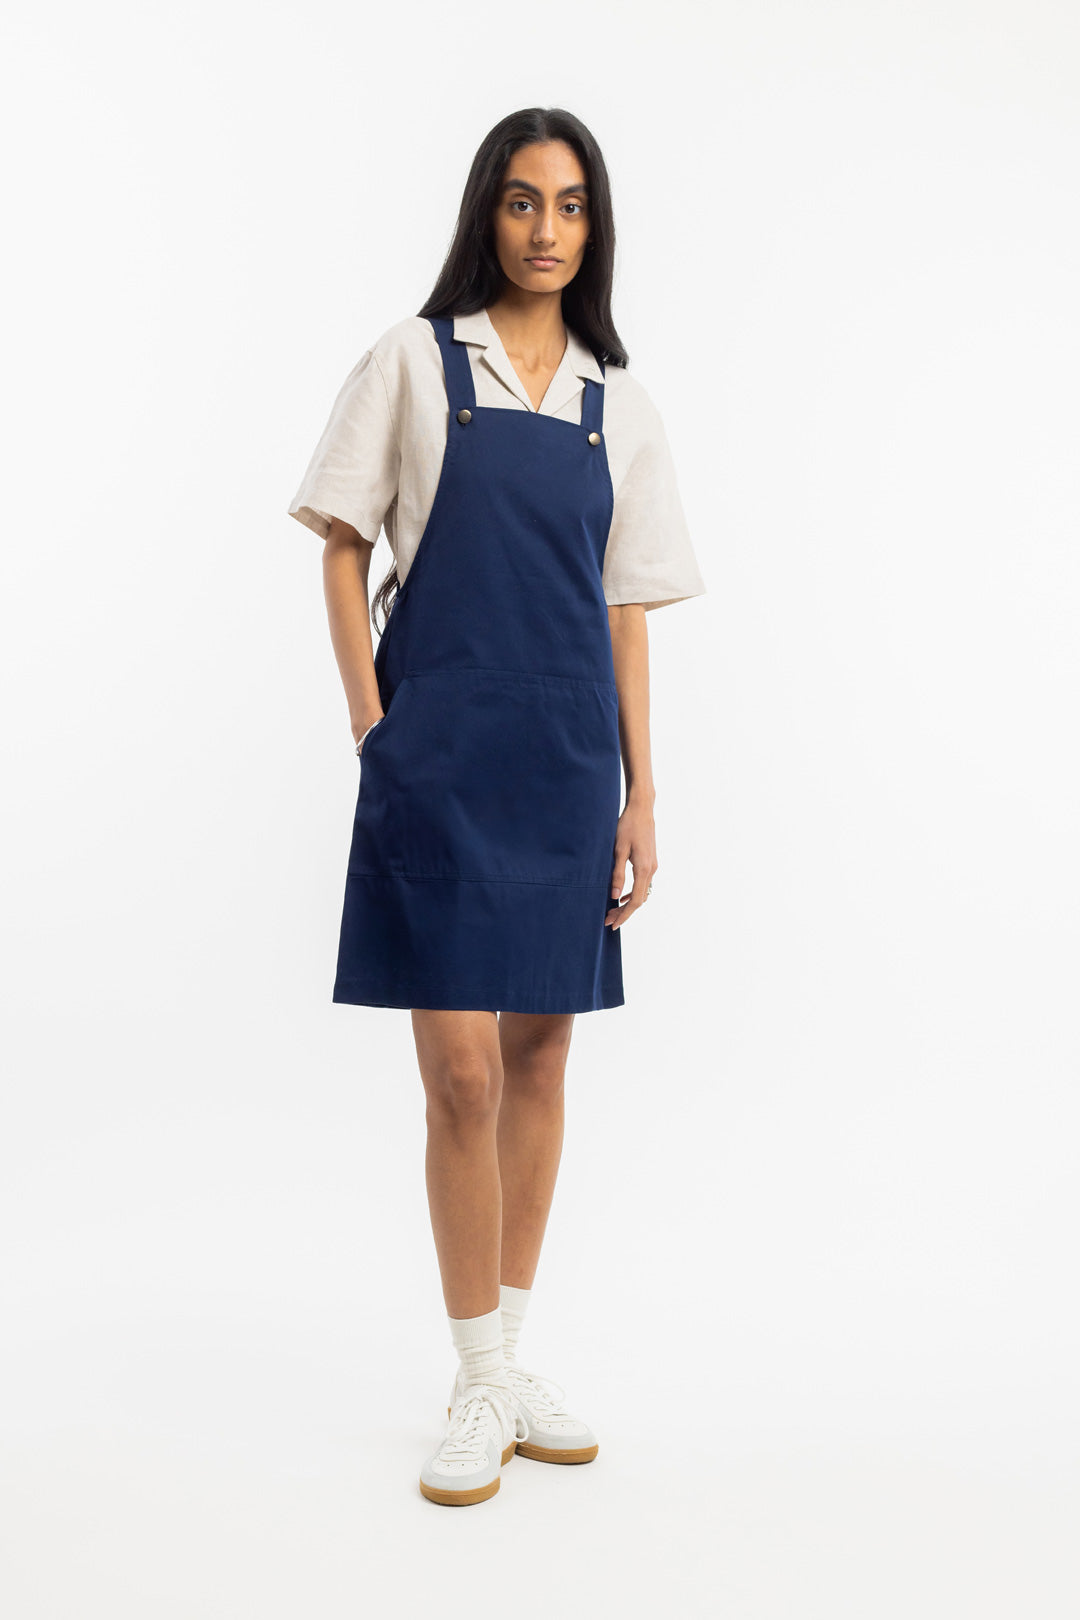 Blue dungaree dress made of organic cotton from Rotholz